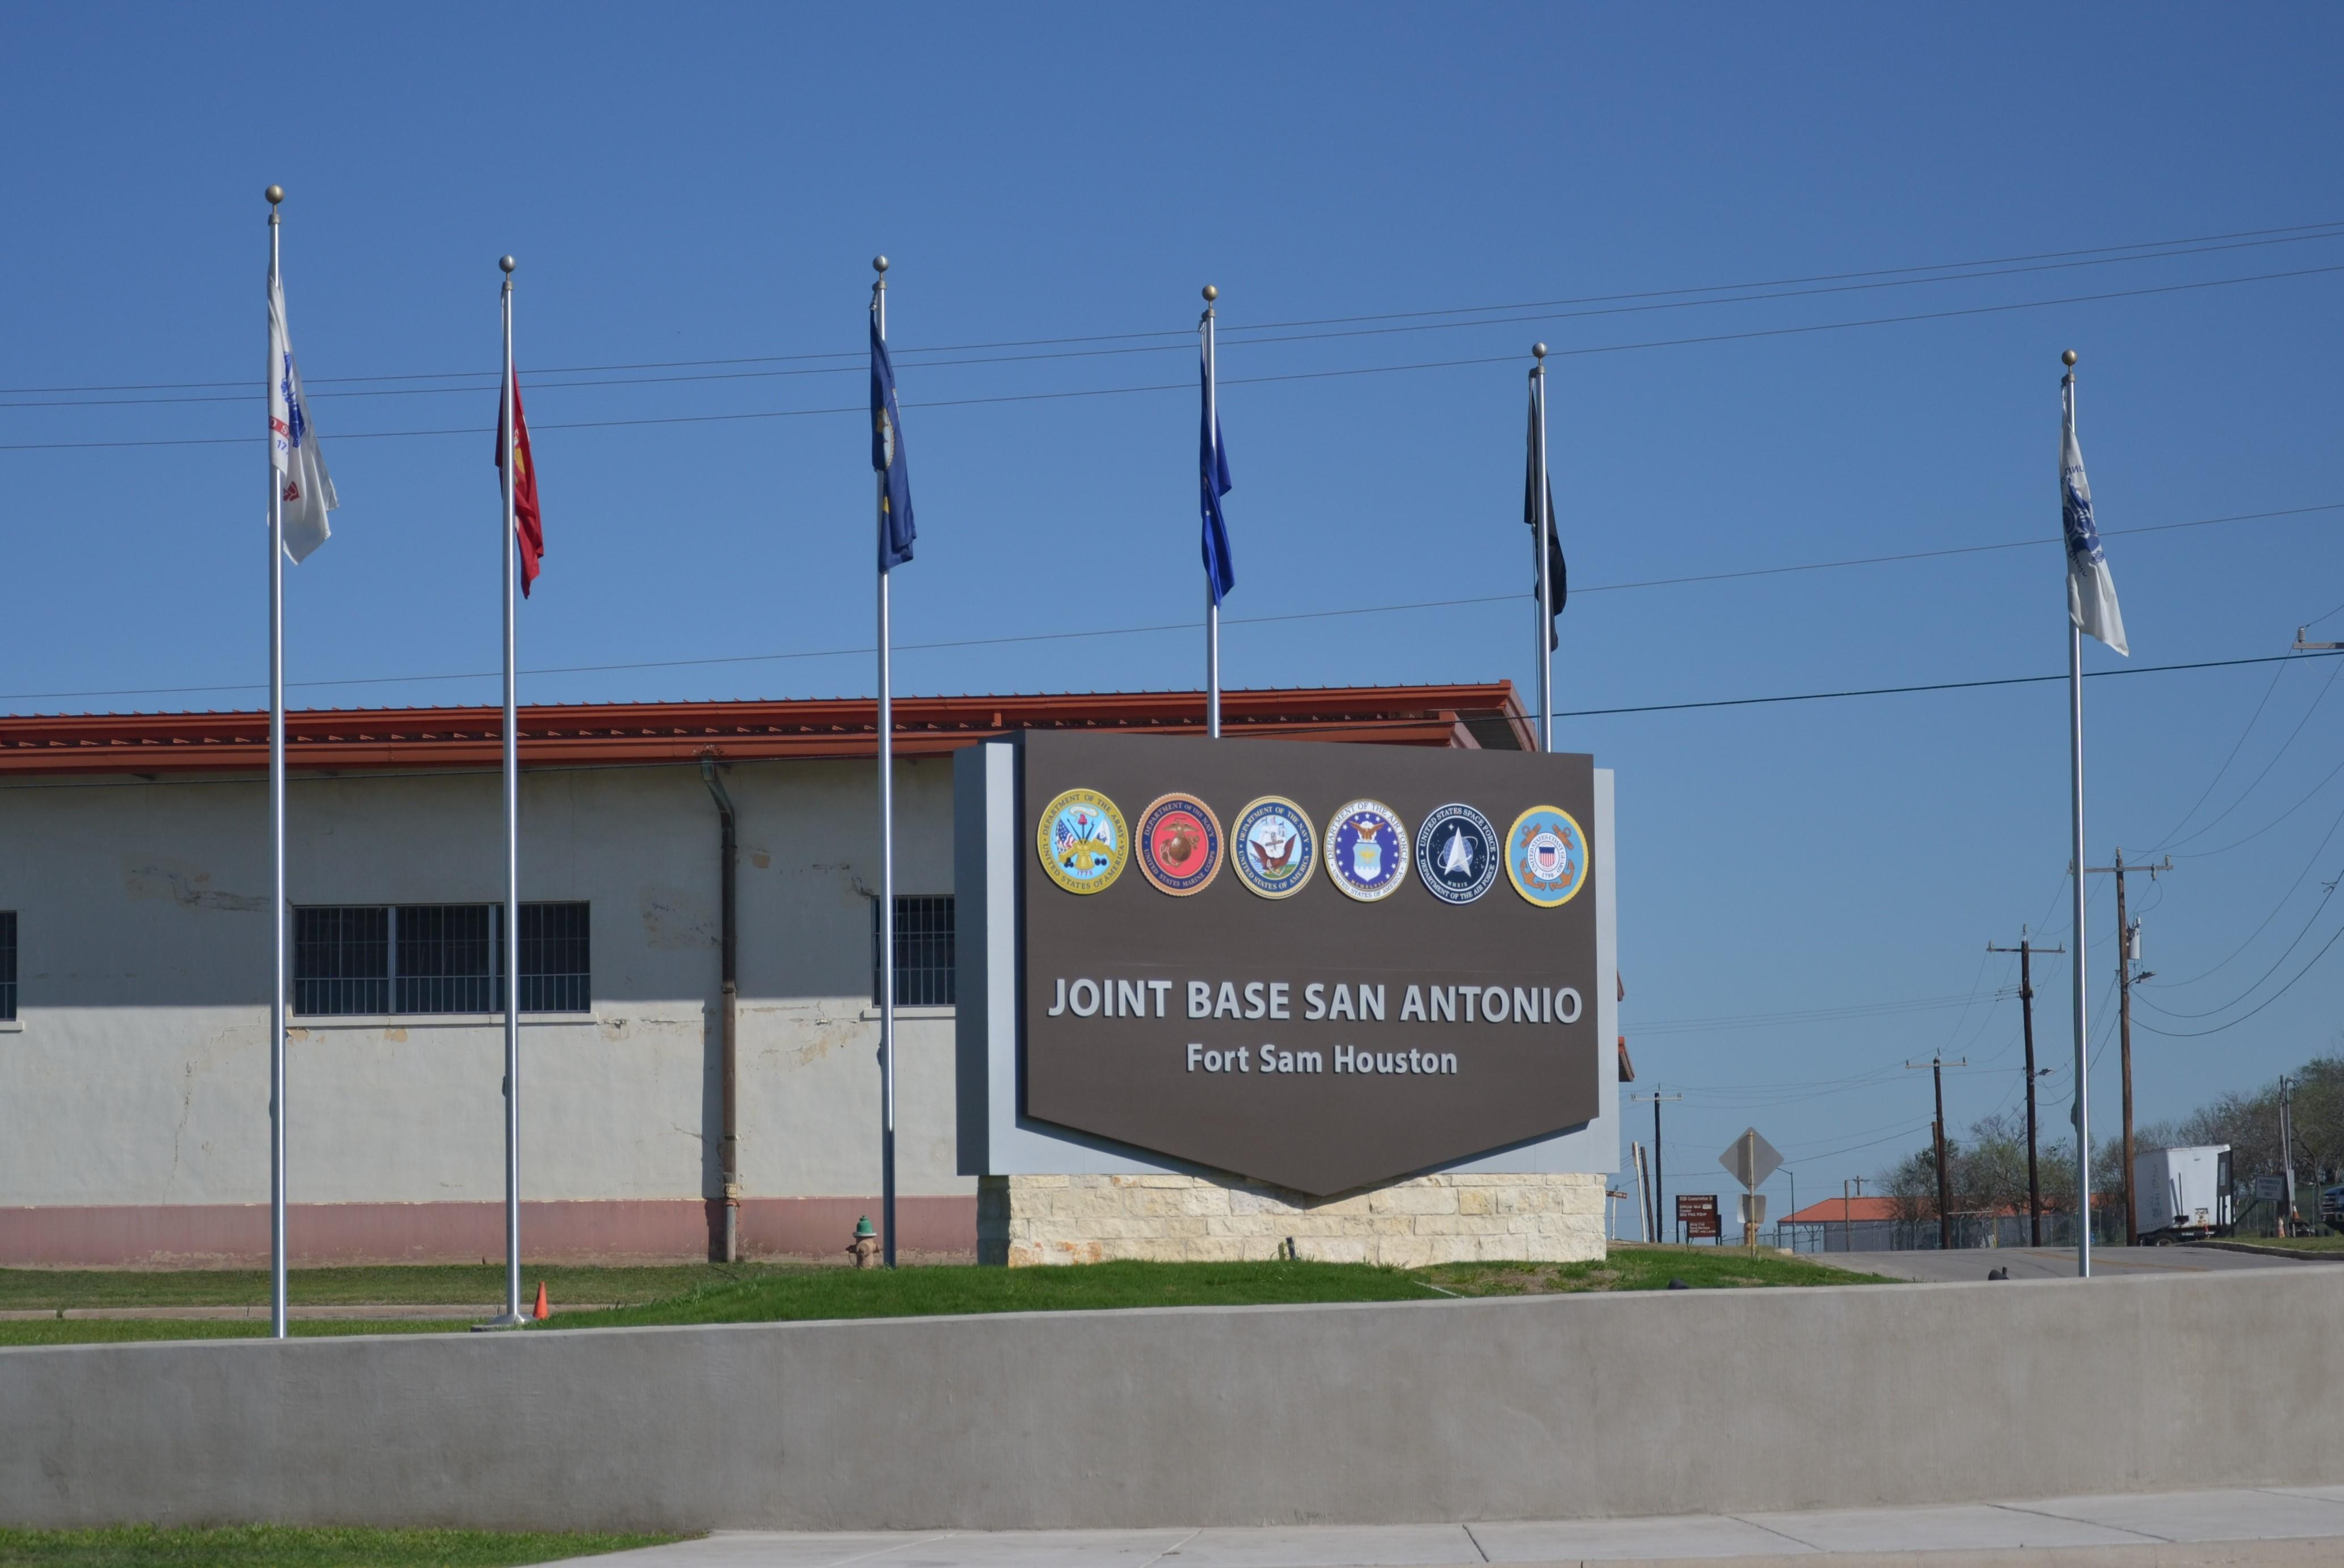 Fort Sam Houston is home to more than 36,000 active duty and DOD civilians; 48,000 family members; and 76,000 retirees. It is home to 502d Air Base Wing, U.S. Army North, U.S. Army South, the Army Medical Department, Army Regional Health Command Central, Brooke Army Medical Center, U.S. Army Medical Center of Excellence, Navy Regional Recruiting, and the Medical Education and Training Campus, which graduates over 16,500 students from 49 medical programs annually.